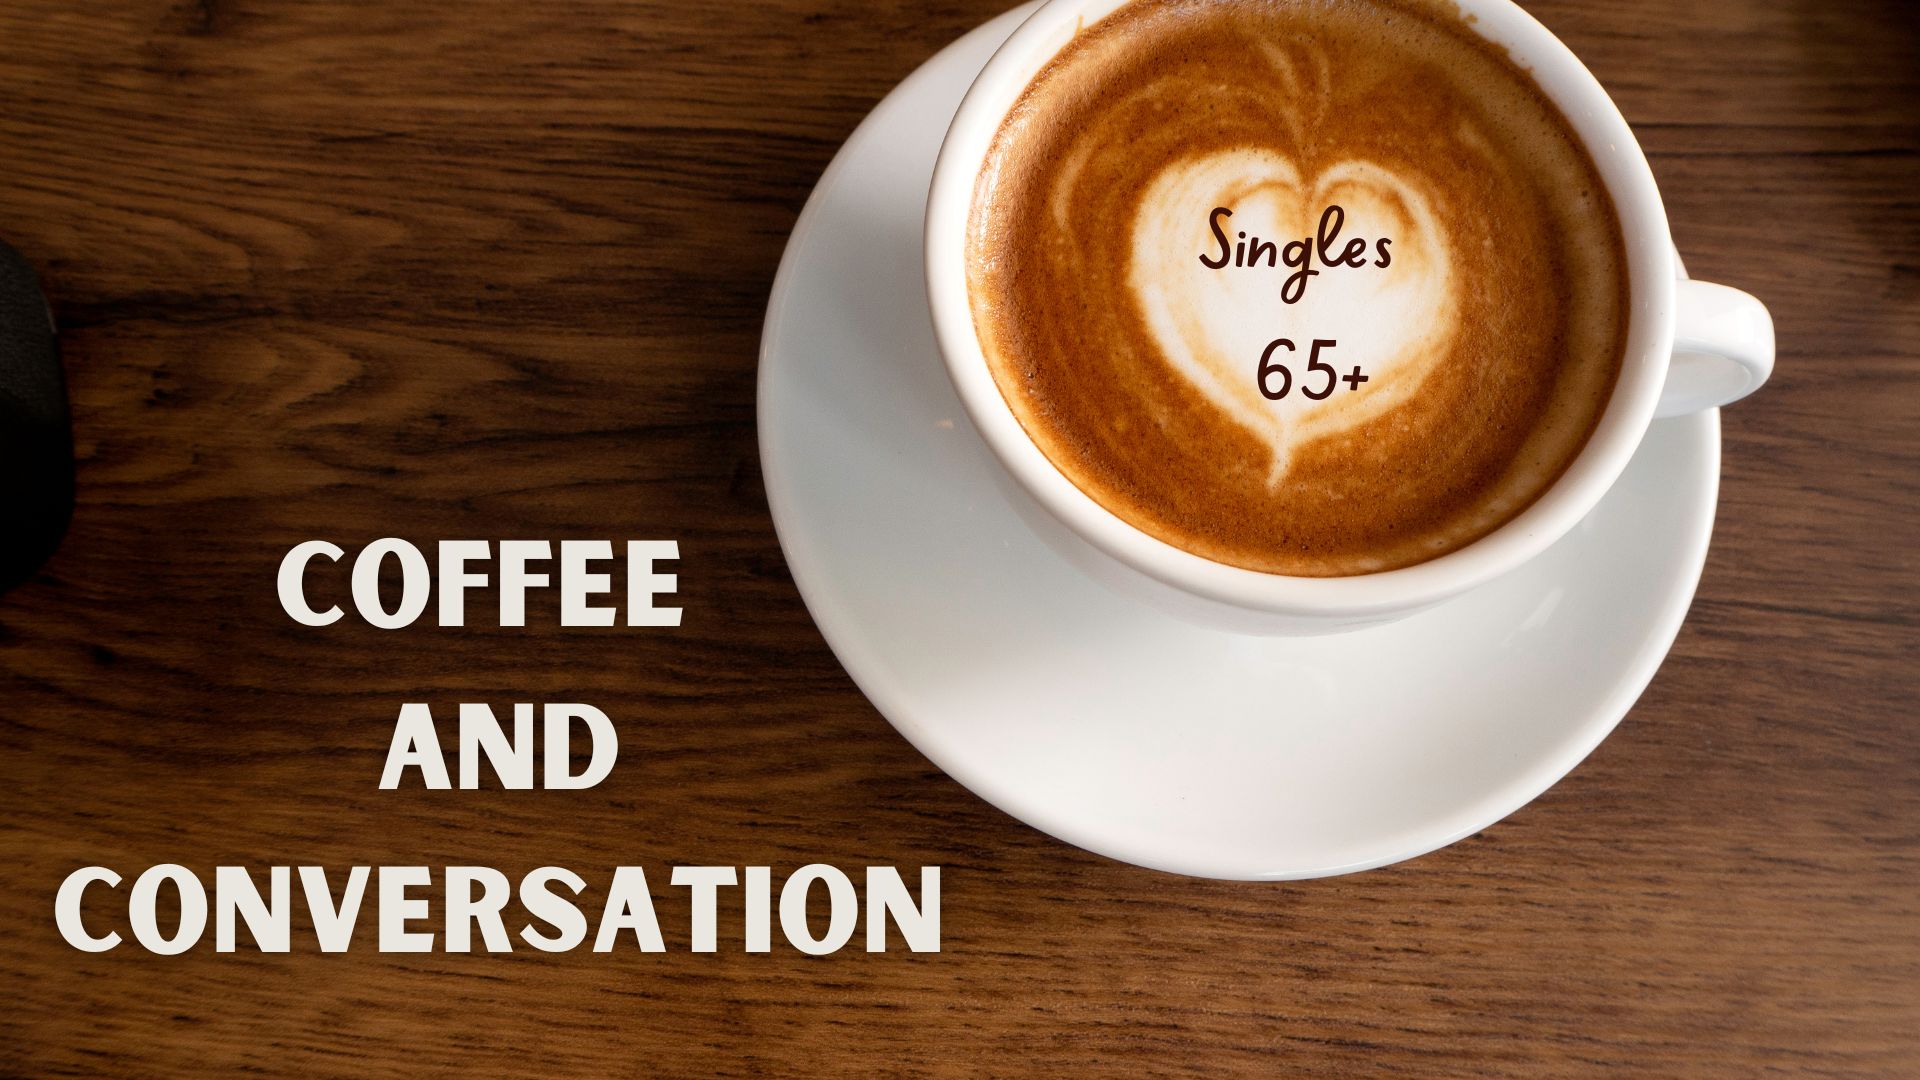 Coffee and Conversation with Singles 65  Trip to Udvar-Hazy Air 